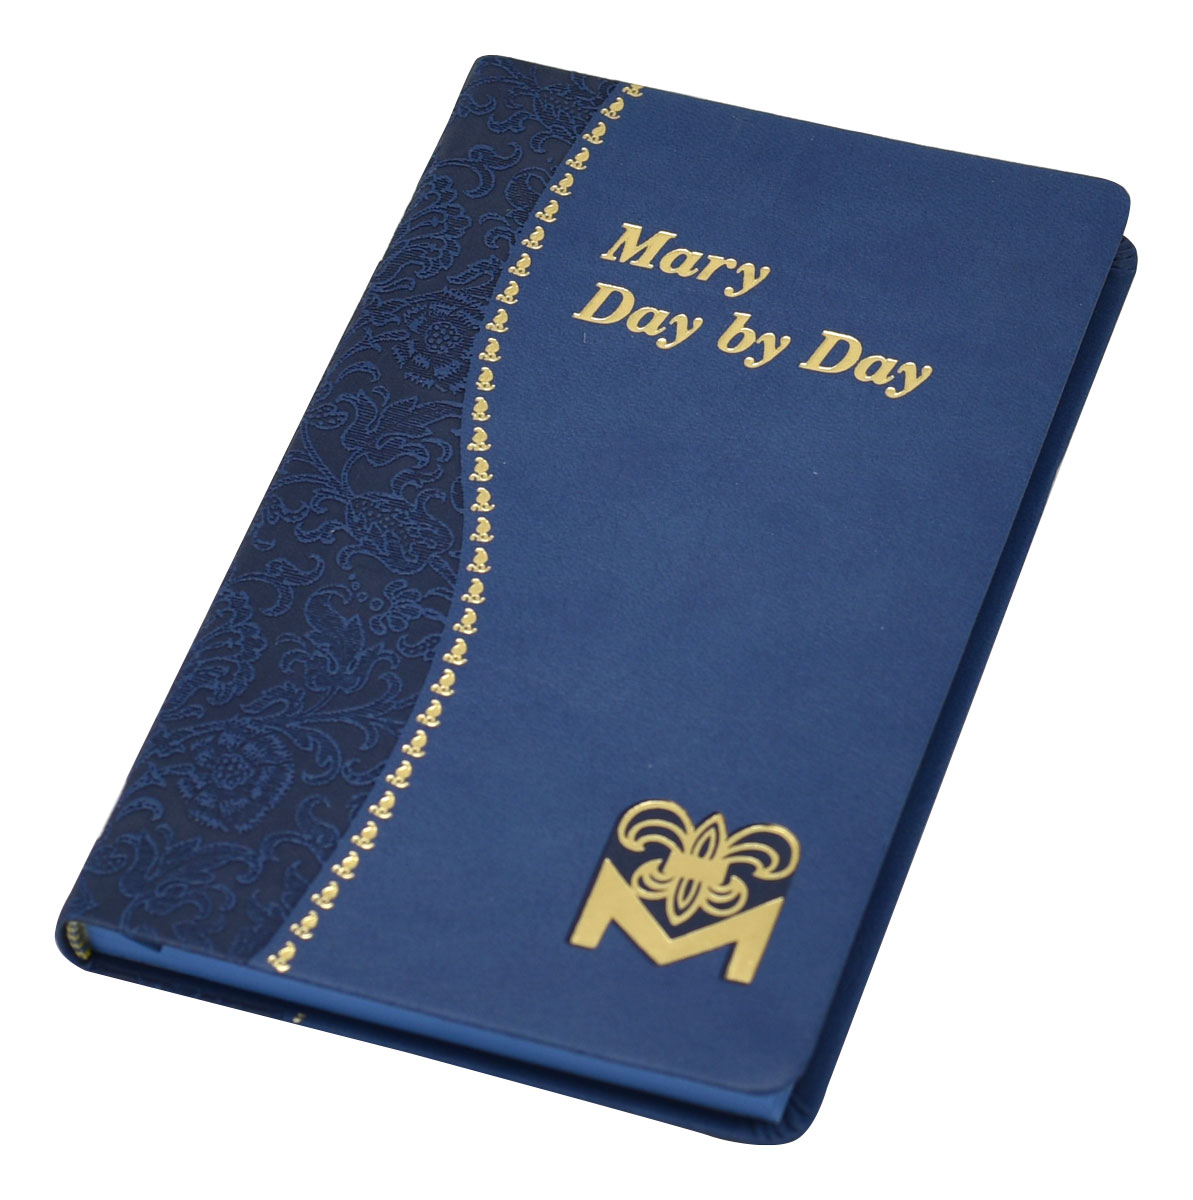 TEC-18019 - Mary Day By Day